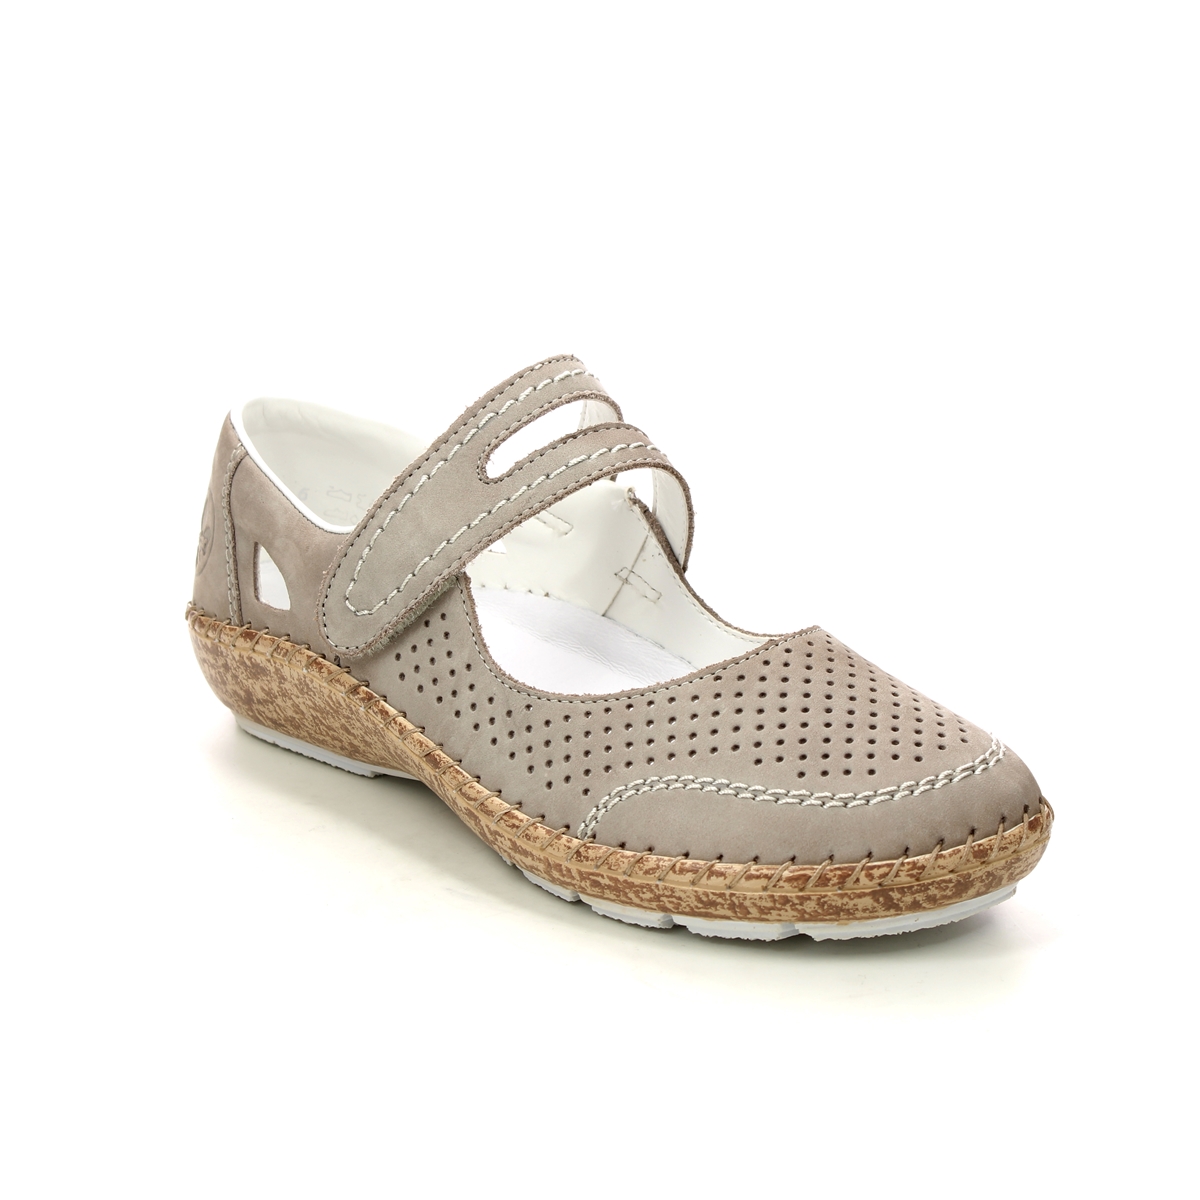 Rieker 44885-40 Light Grey Leather Womens Mary Jane Shoes in a Plain Leather in Size 36